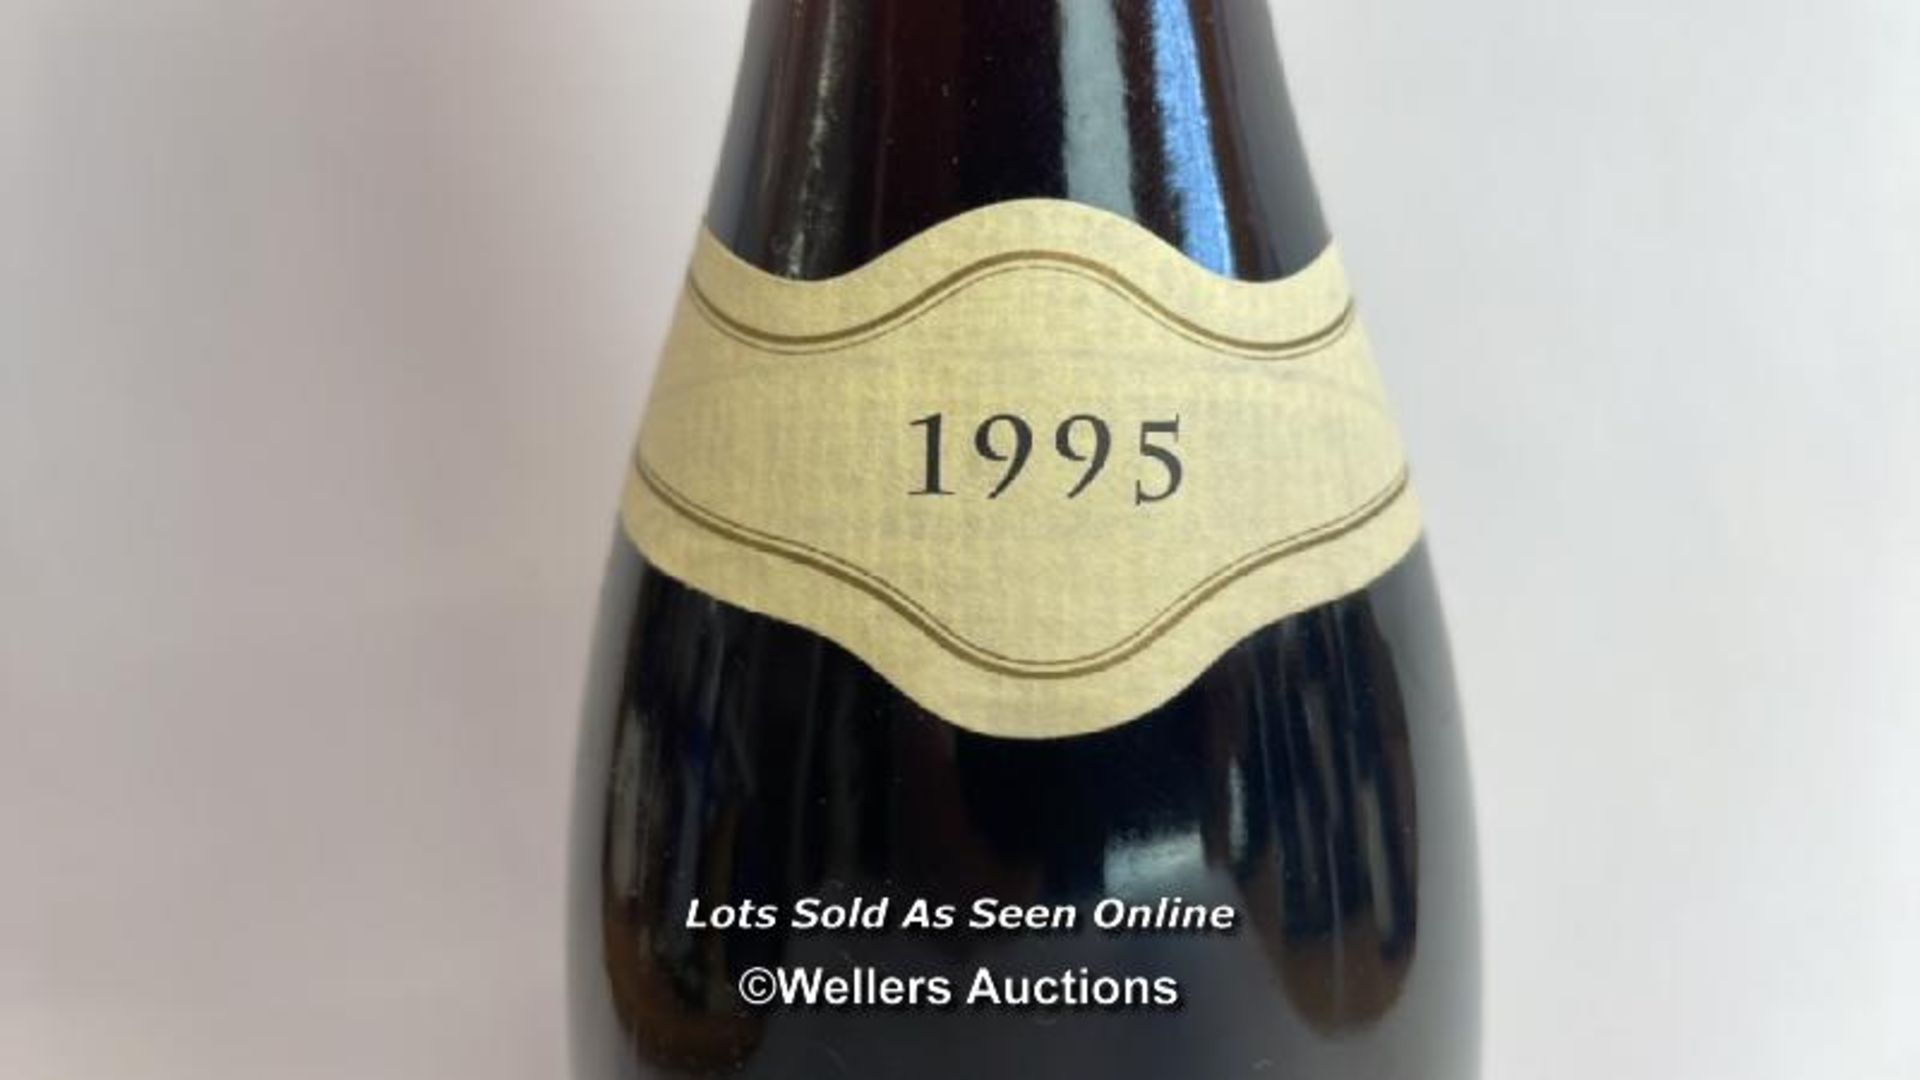 1995 Louis Josse Nuits-St-Georges, 75CL, 13% vol / Please see images for fill level and general - Image 3 of 4